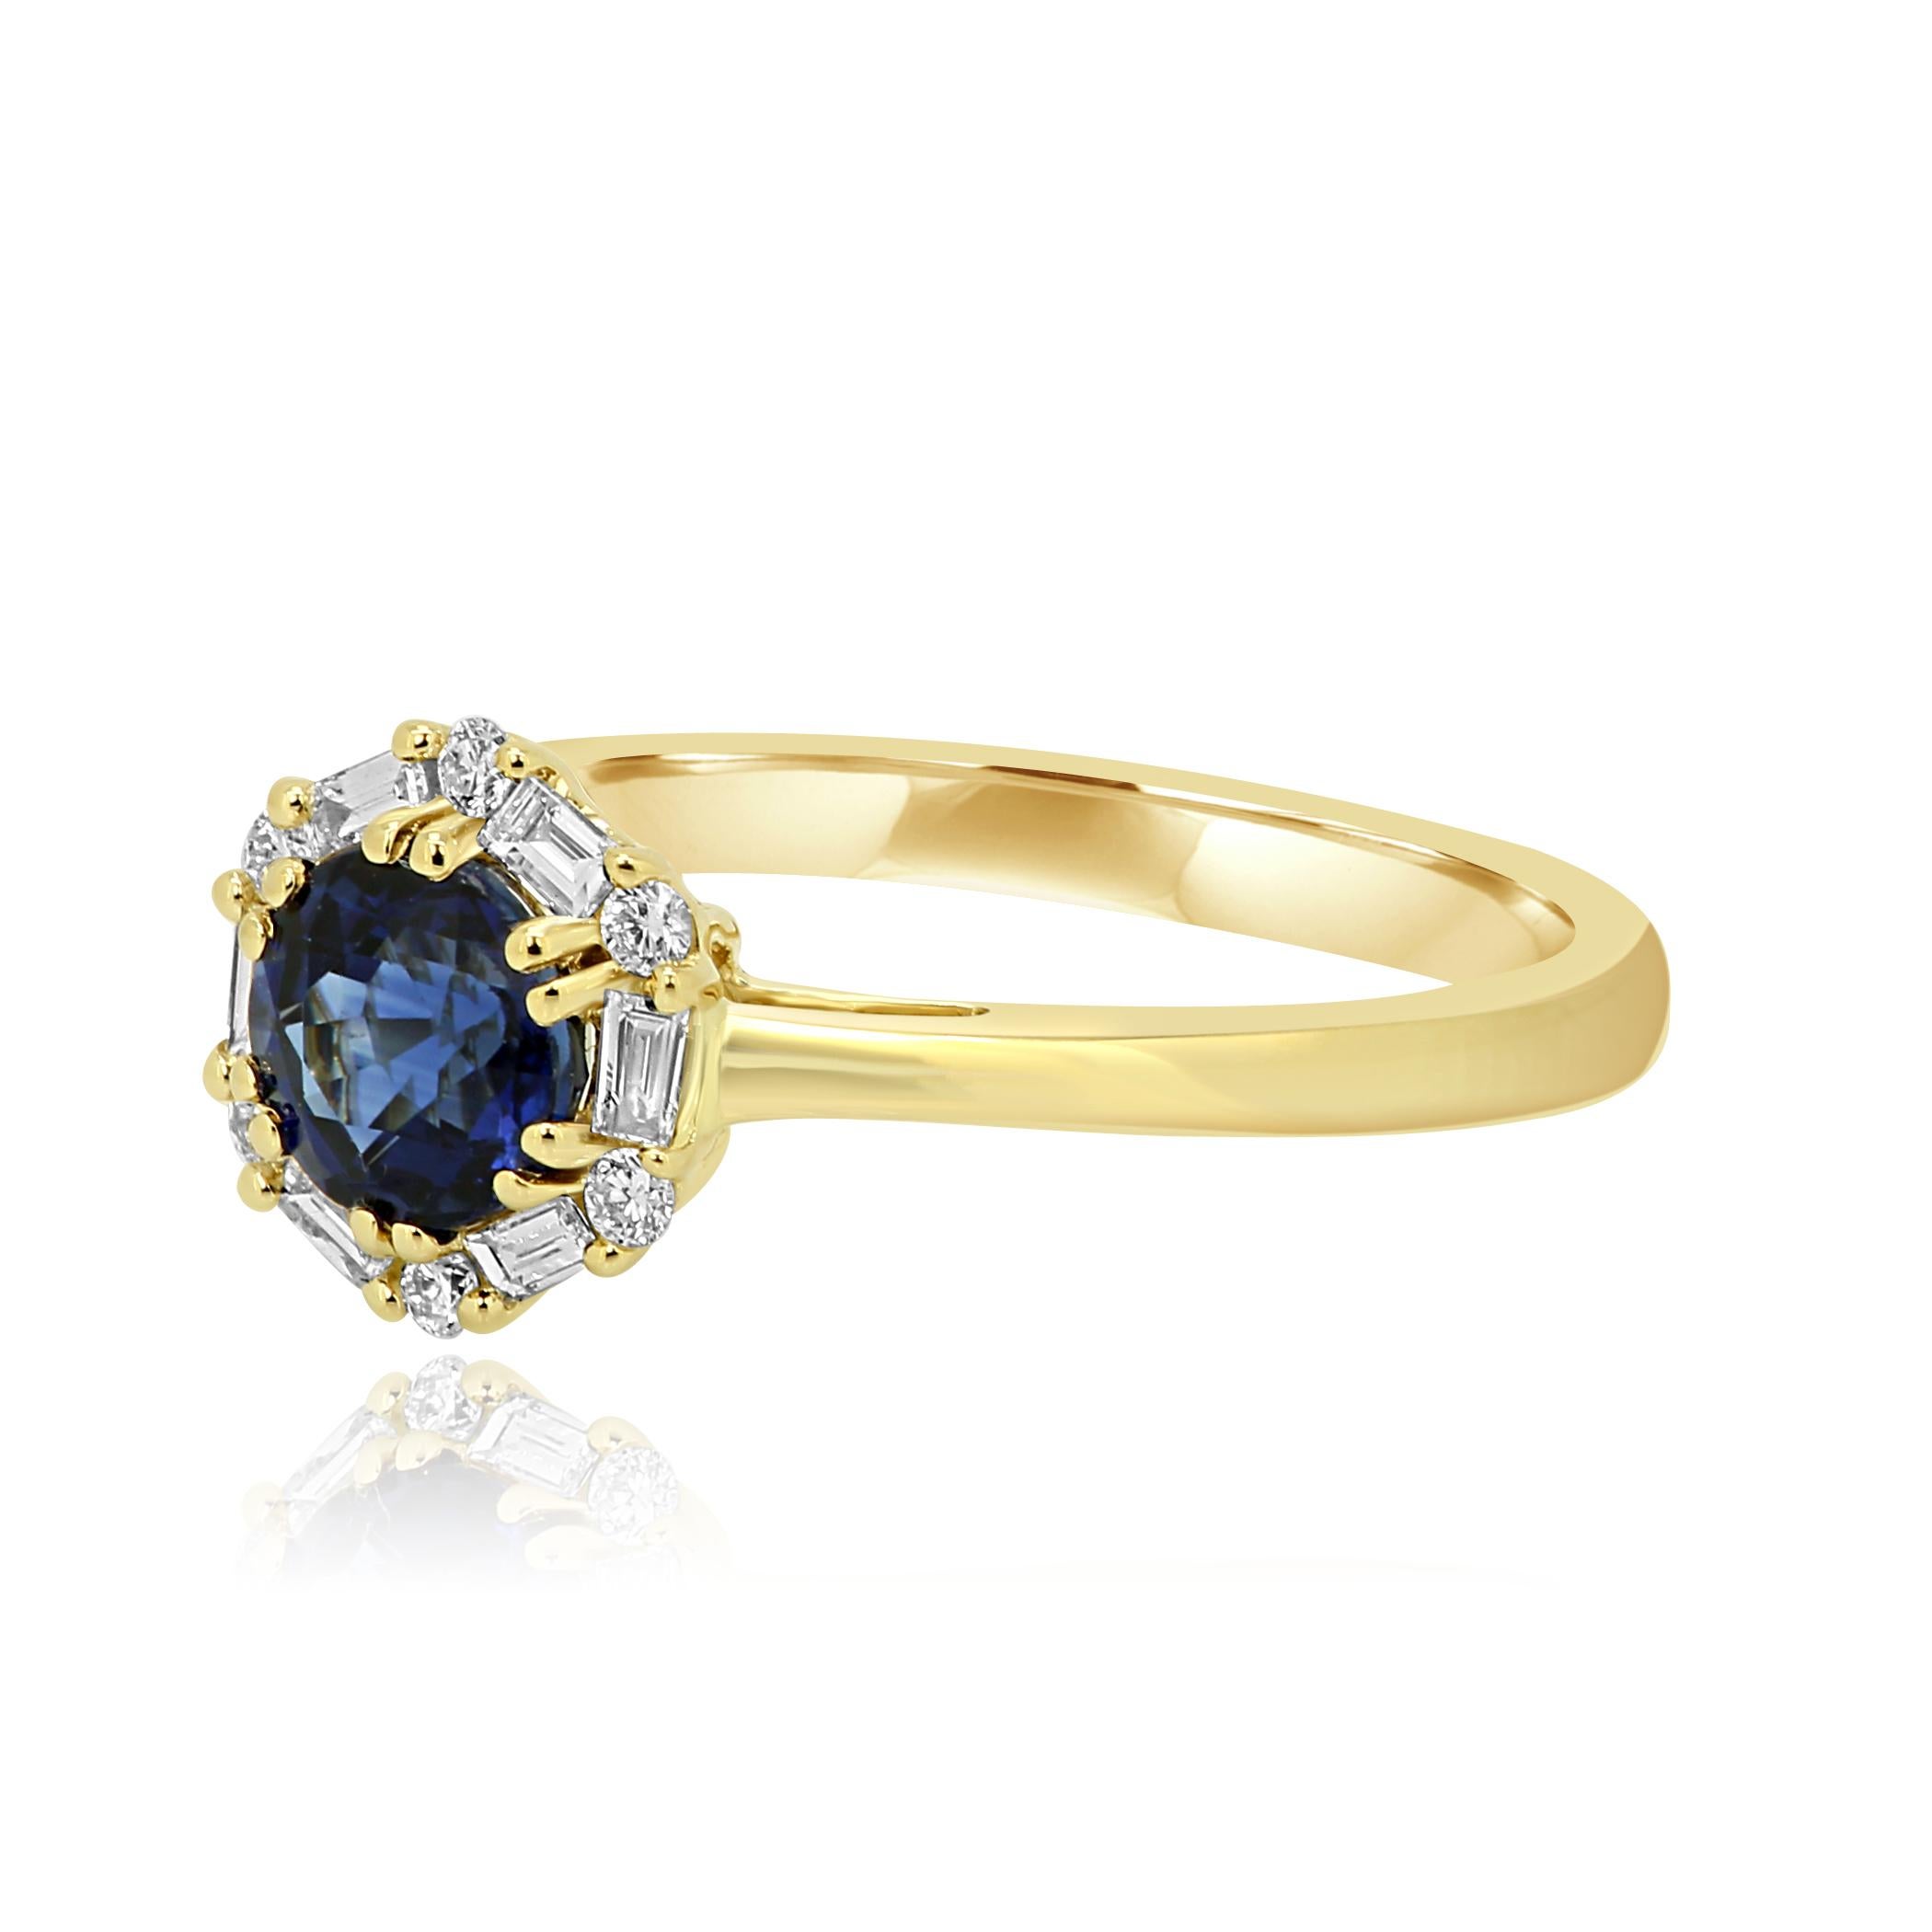 Blue Sapphire Round 1.00 Carat Encircled in a single Halo of Colorless Round Brilliant VS-SI Clarity 0.07 Carat and Colorless Diamond Baguettes VS Clarity 0.13 Carat. In 14K Yellow Gold Bridal Cocktail Ring.

Style available in different price